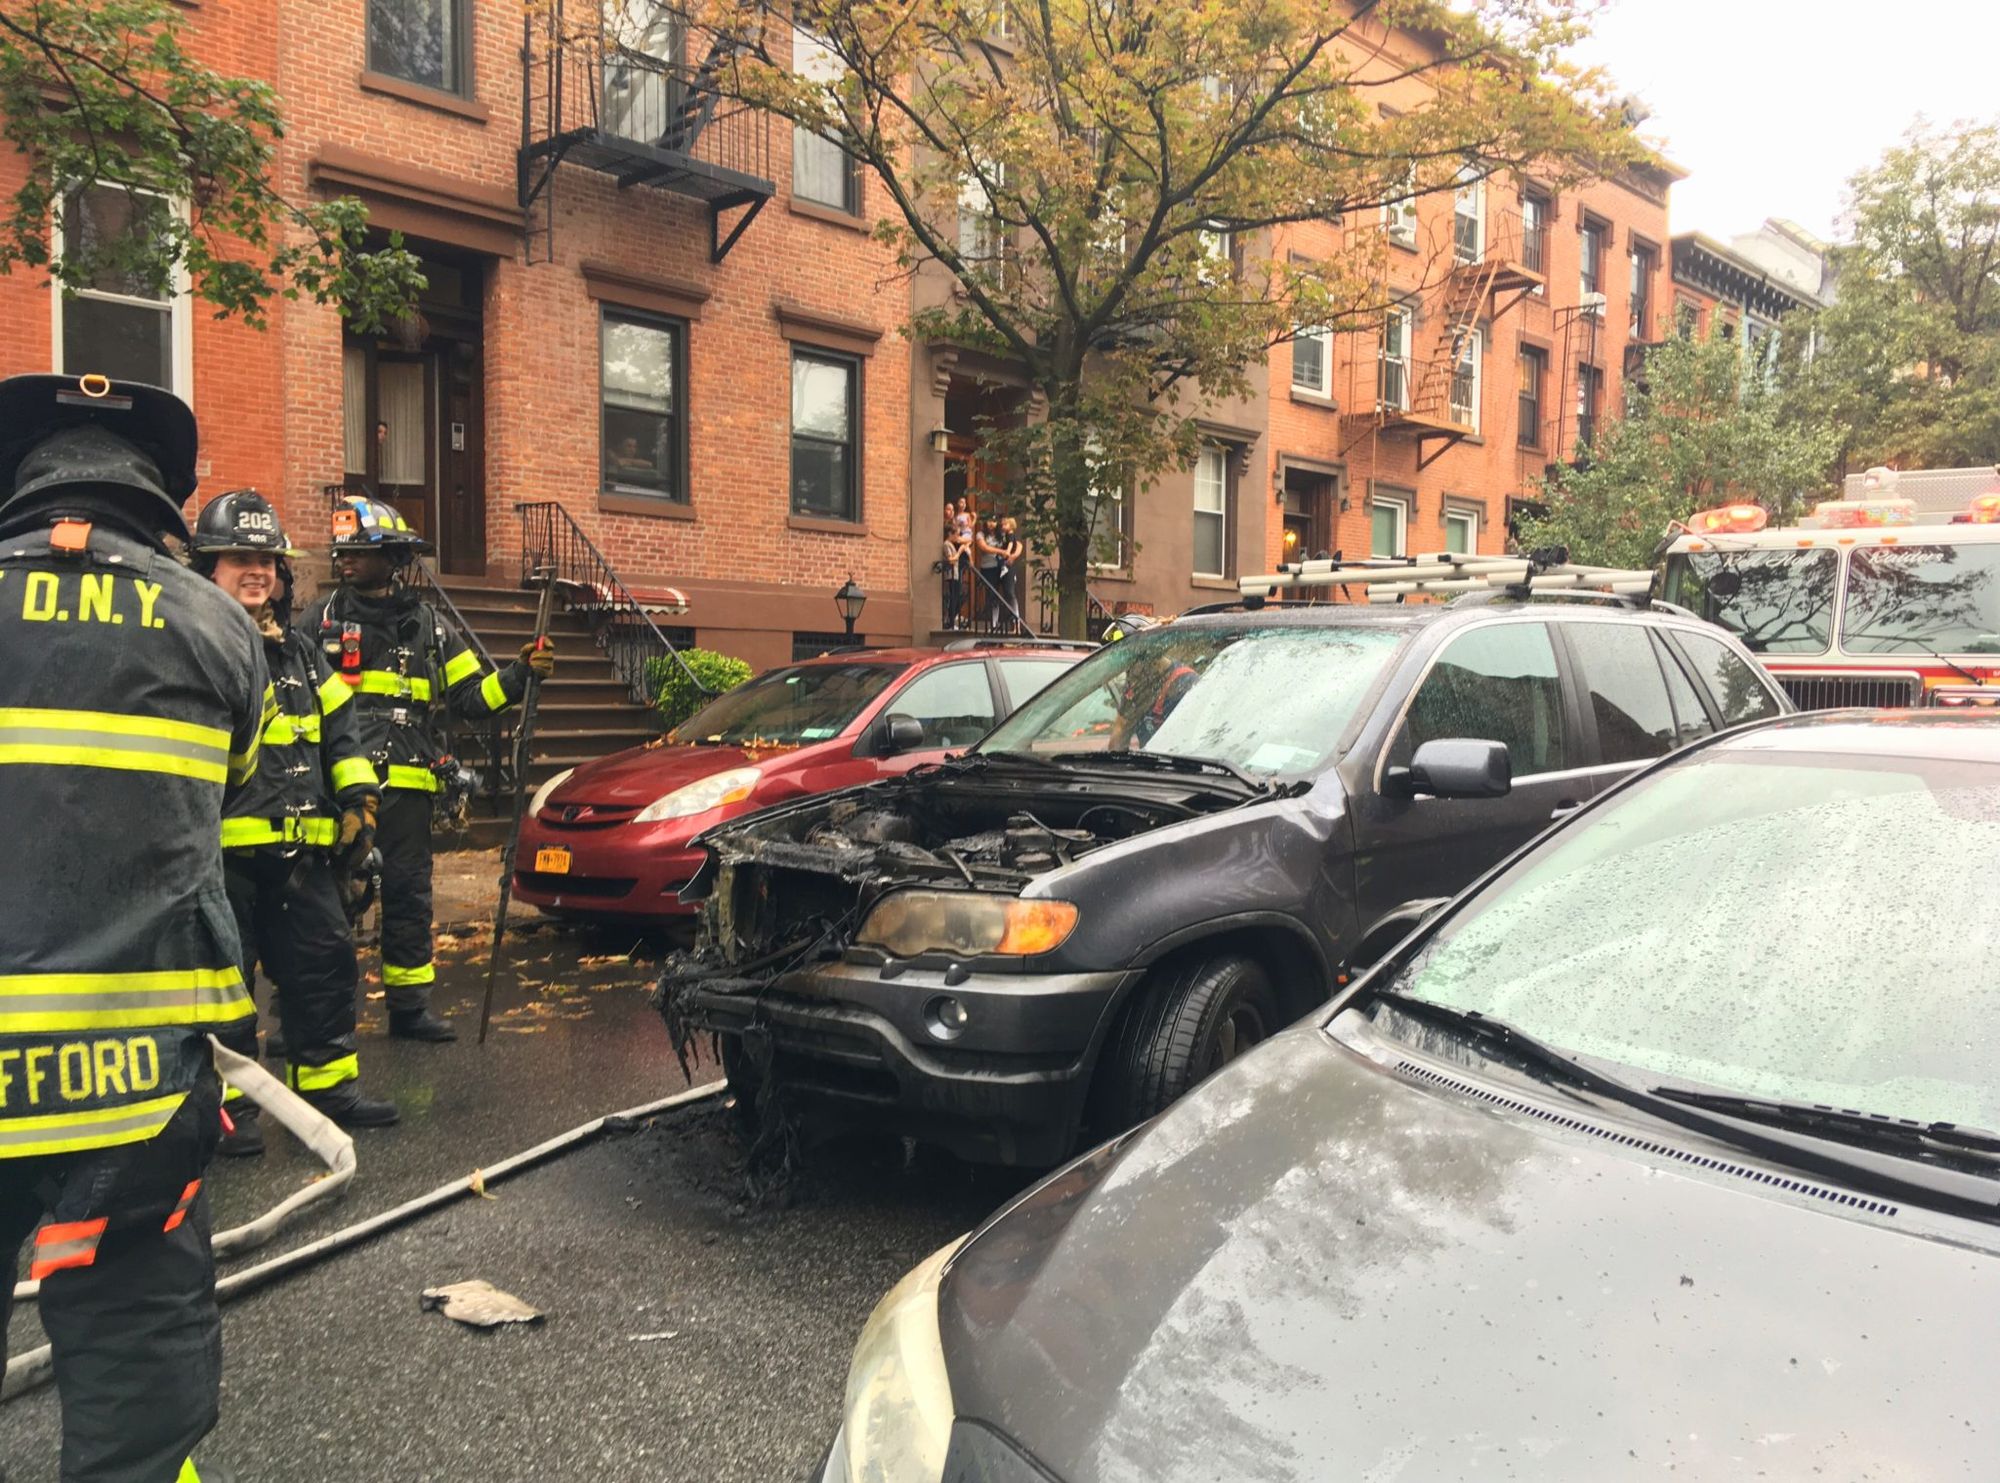 BMW Engine Bursts Into Flames in Cobble Hill, Not The First This Week